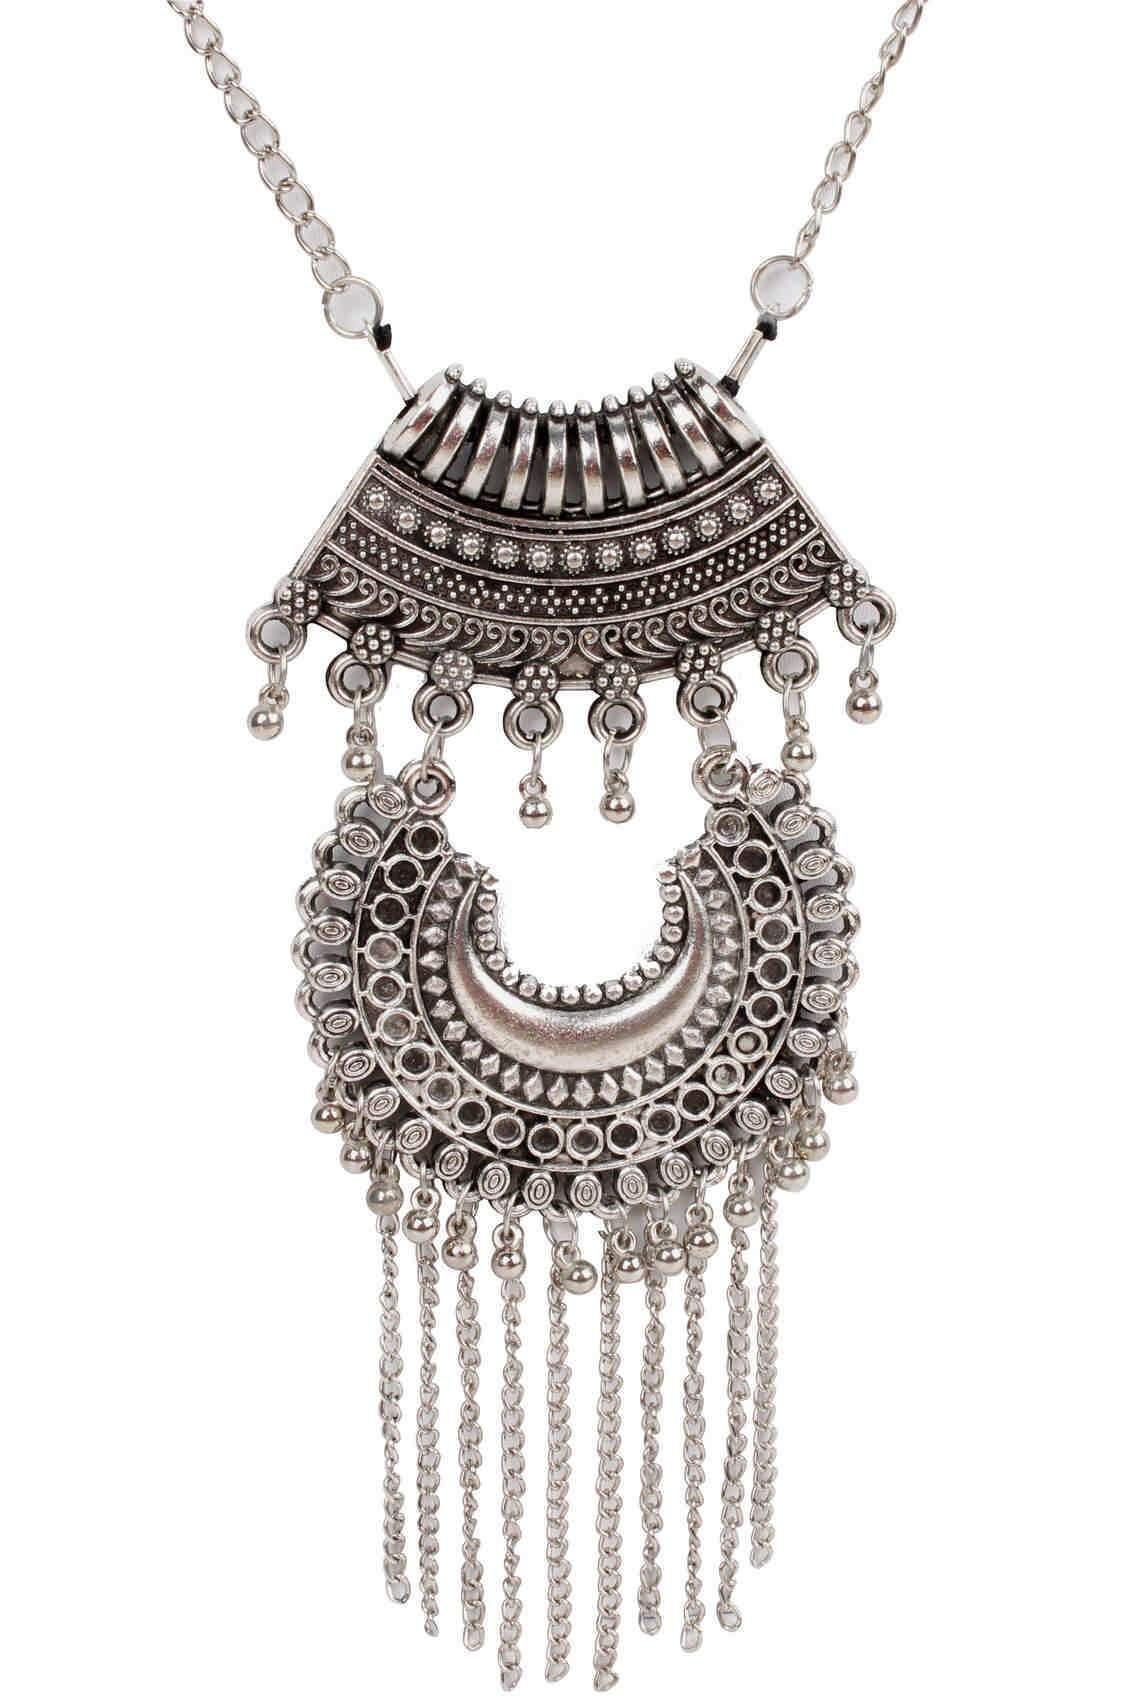 Indian Petals Retro style Afgani design Metal Imitation Fashion Oxidised Necklace with Tassels for Girls and Ladies - Indian Petals